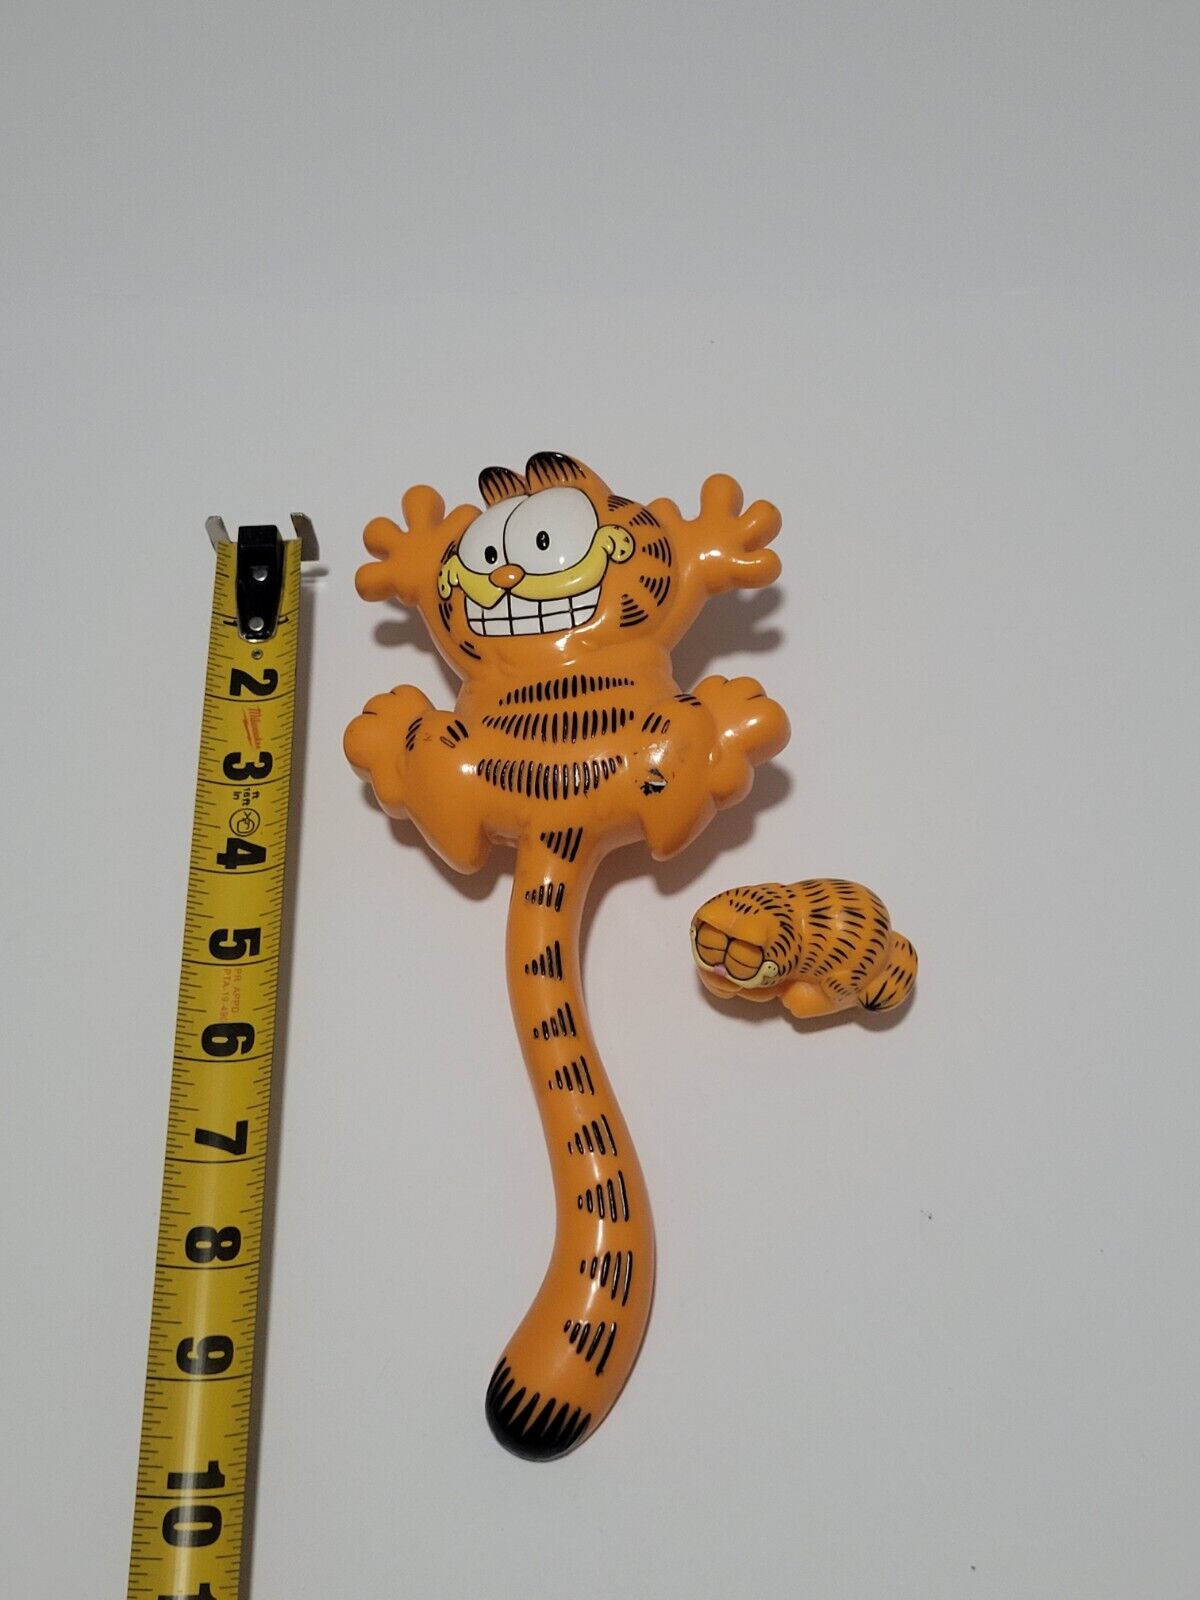 Vintage AVON Garfield The Cat Shaped Novelty Large & Mini Hair Brushes Lot of 2